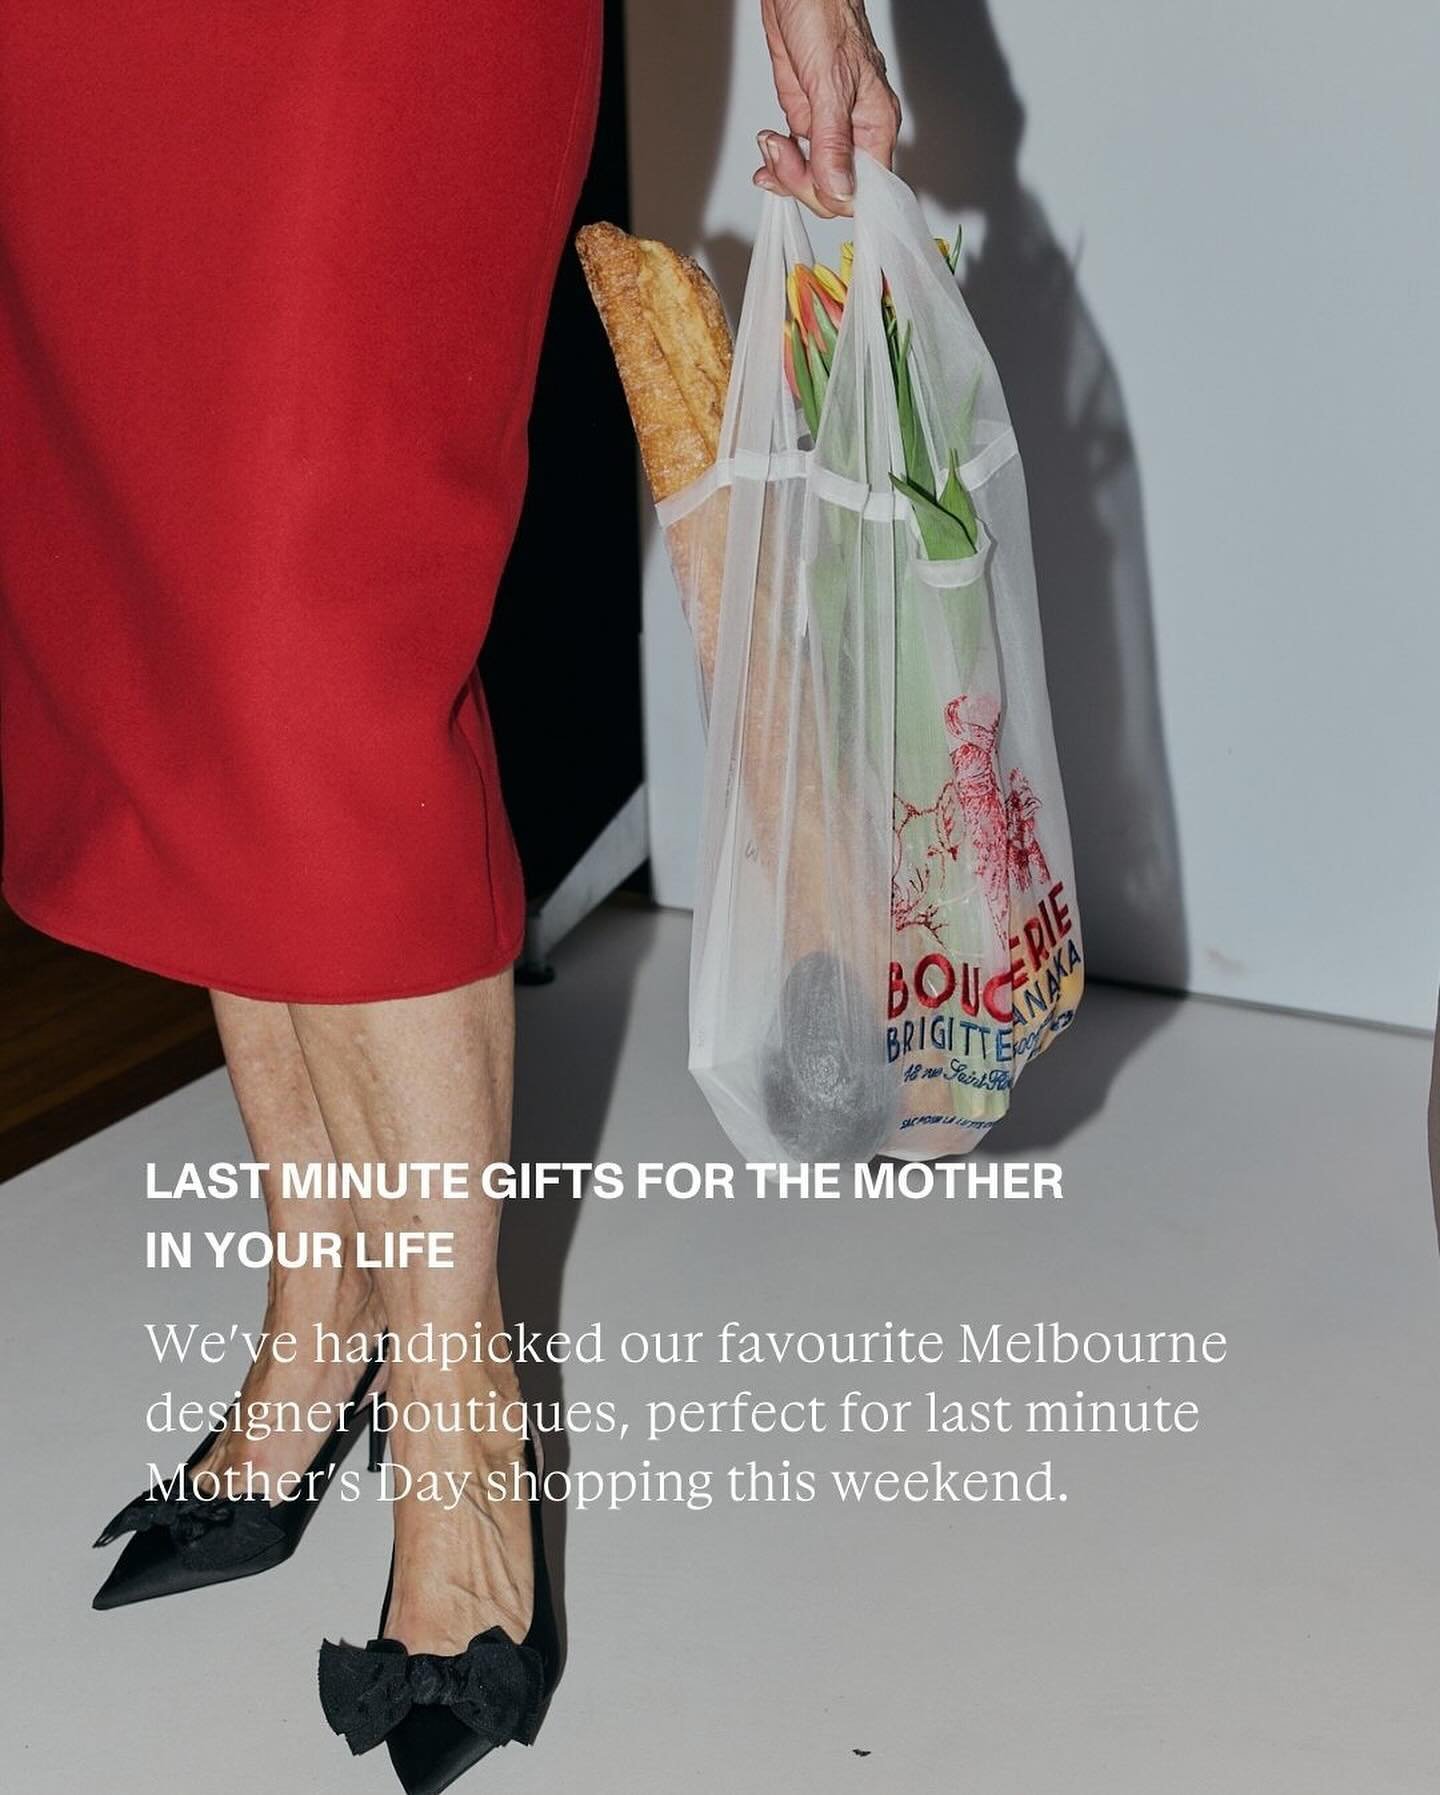 Treat the mother figure in your life! 🎀 We&rsquo;ve handpicked some of our favourite Melbourne designer boutiques that you can visit over the weekend, just in time for Mother&rsquo;s Day. Or even better? Make a day of it and take them shopping.
&nbs